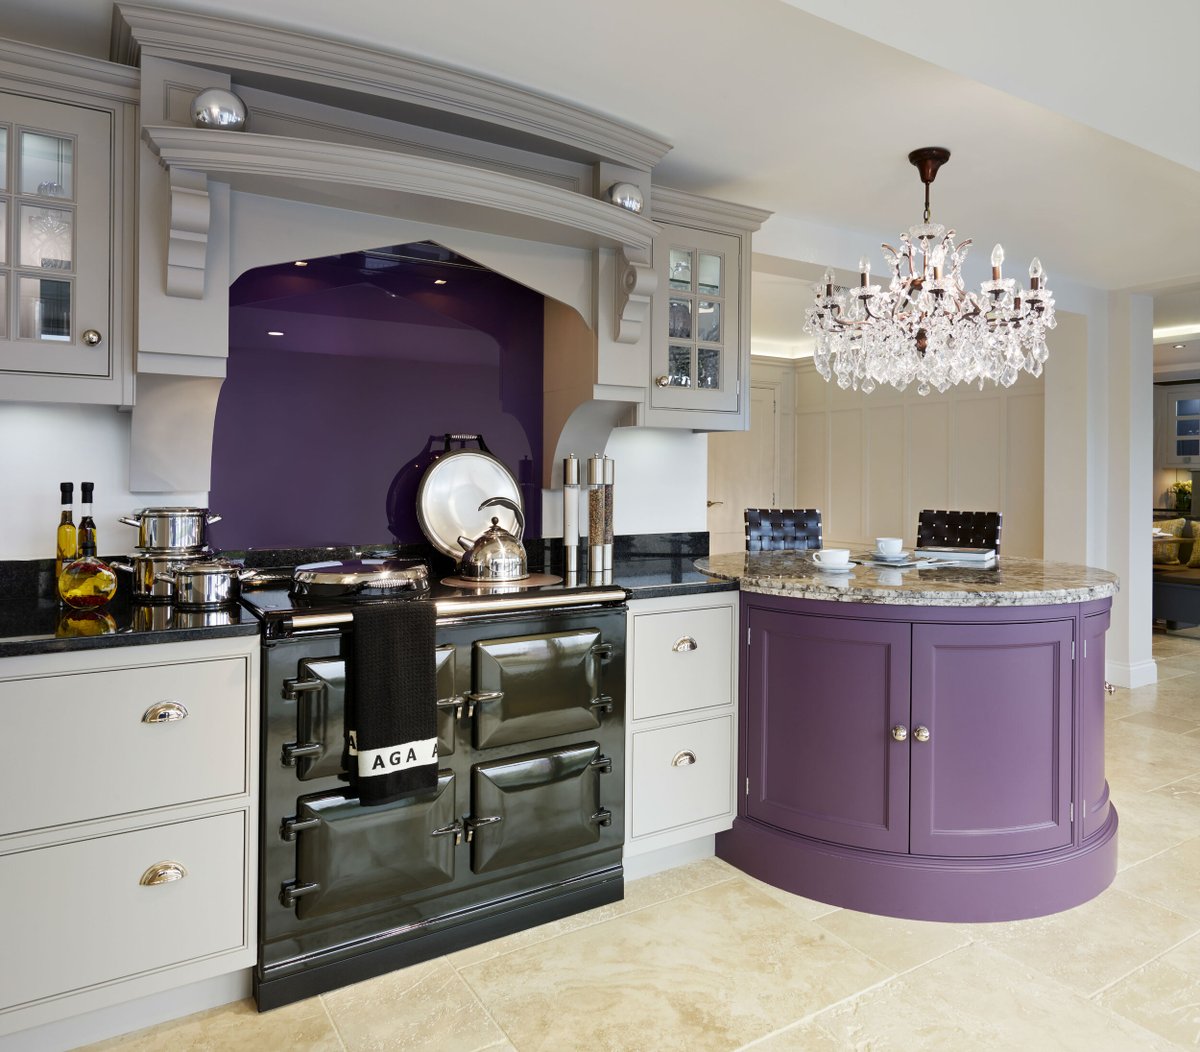 🖤 Would your #Kitchen pass the #GBBO standard?
raymunnkitchens.co.uk/our-blog/2021/…
#KitchenDesign #InteriorDesign #RayMunnKitchens #London #LondonKitchens #KitchenIdeas